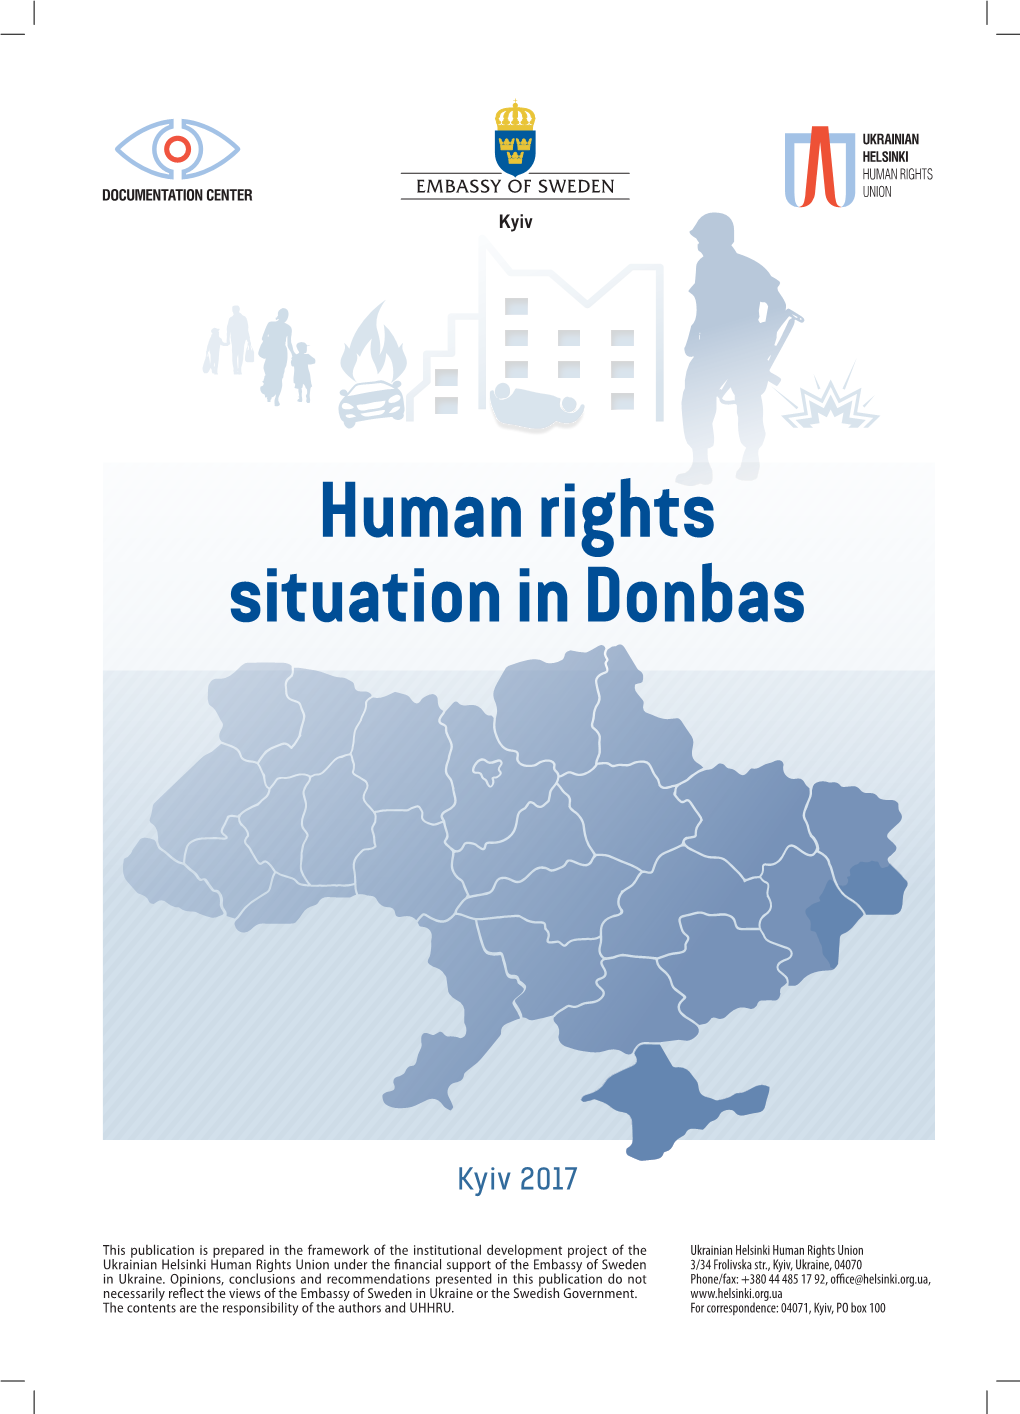 Human Rights Situation in Donbas